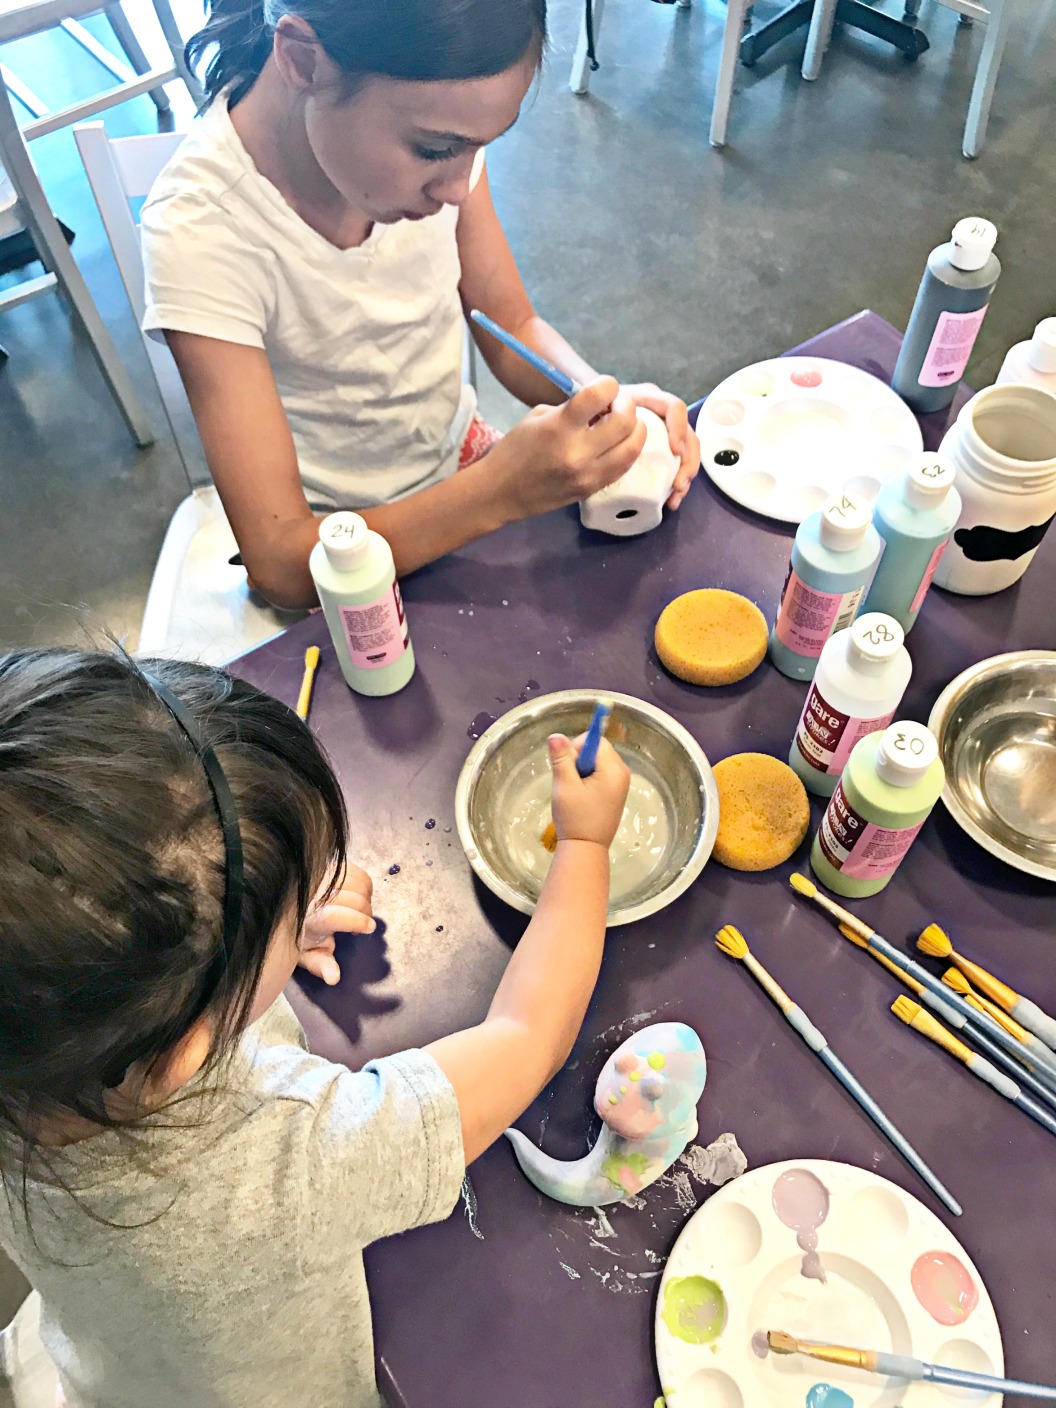 Painting at As You Wish Pottery is the perfect summer activity for all ages.